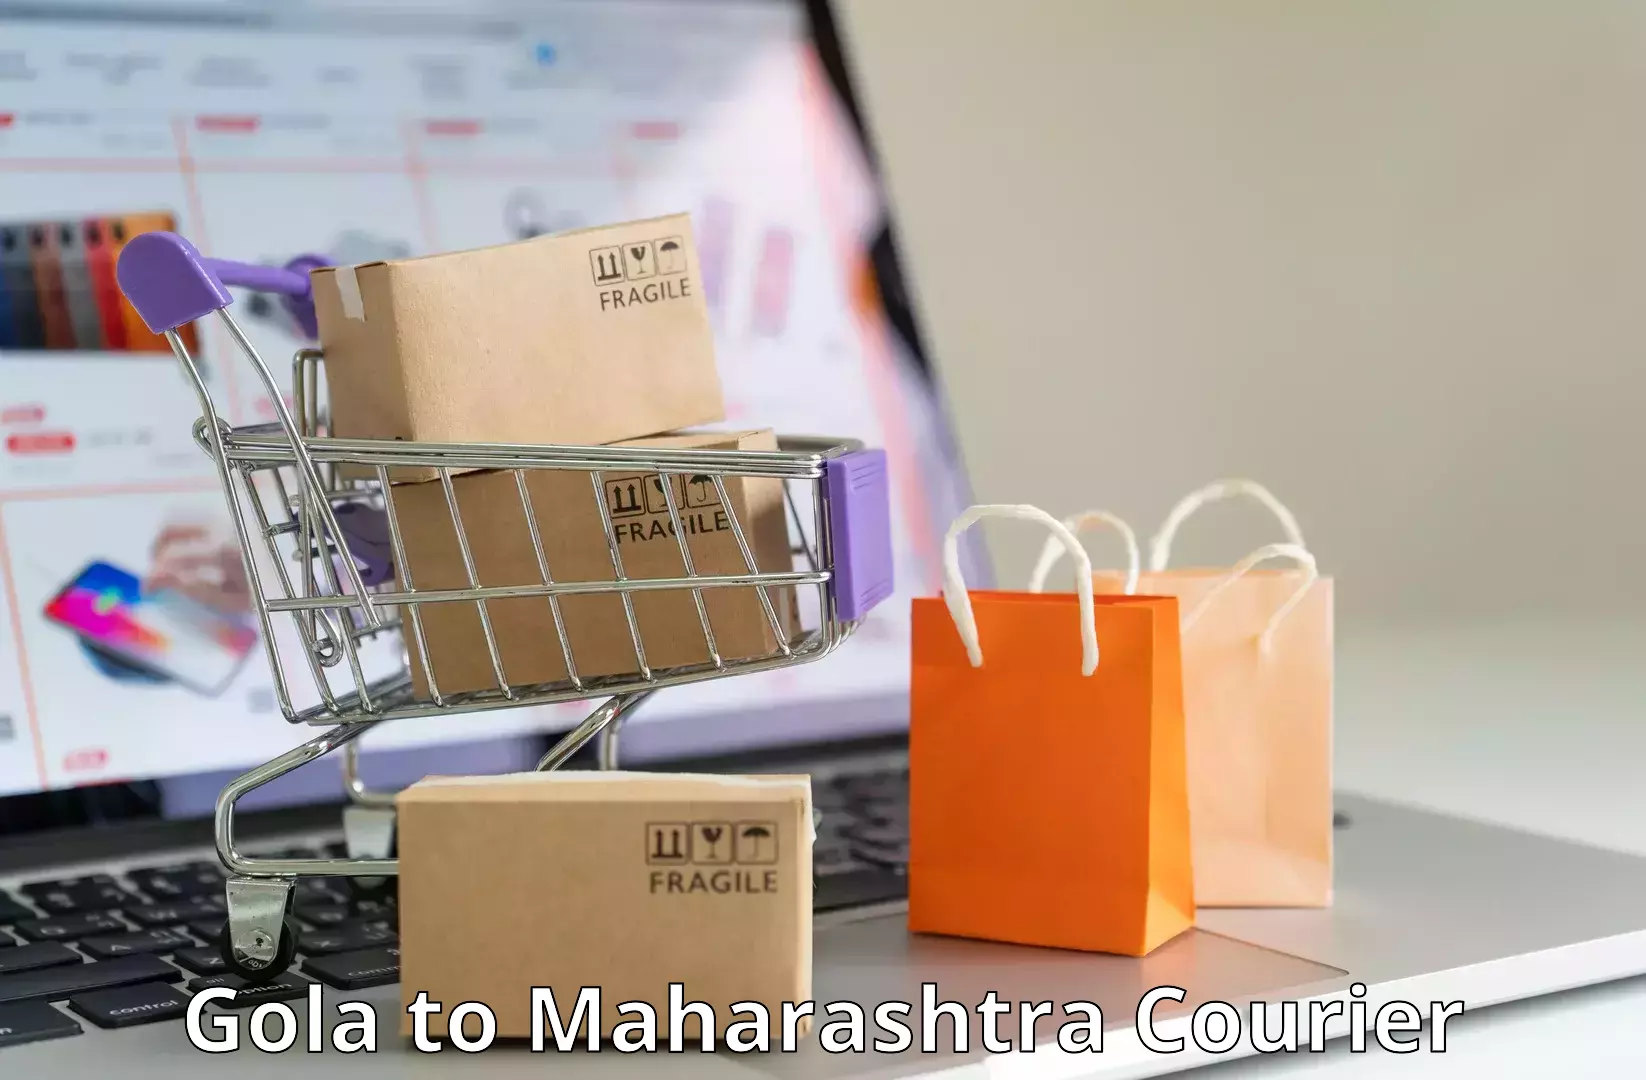 Express delivery network Gola to Vasai